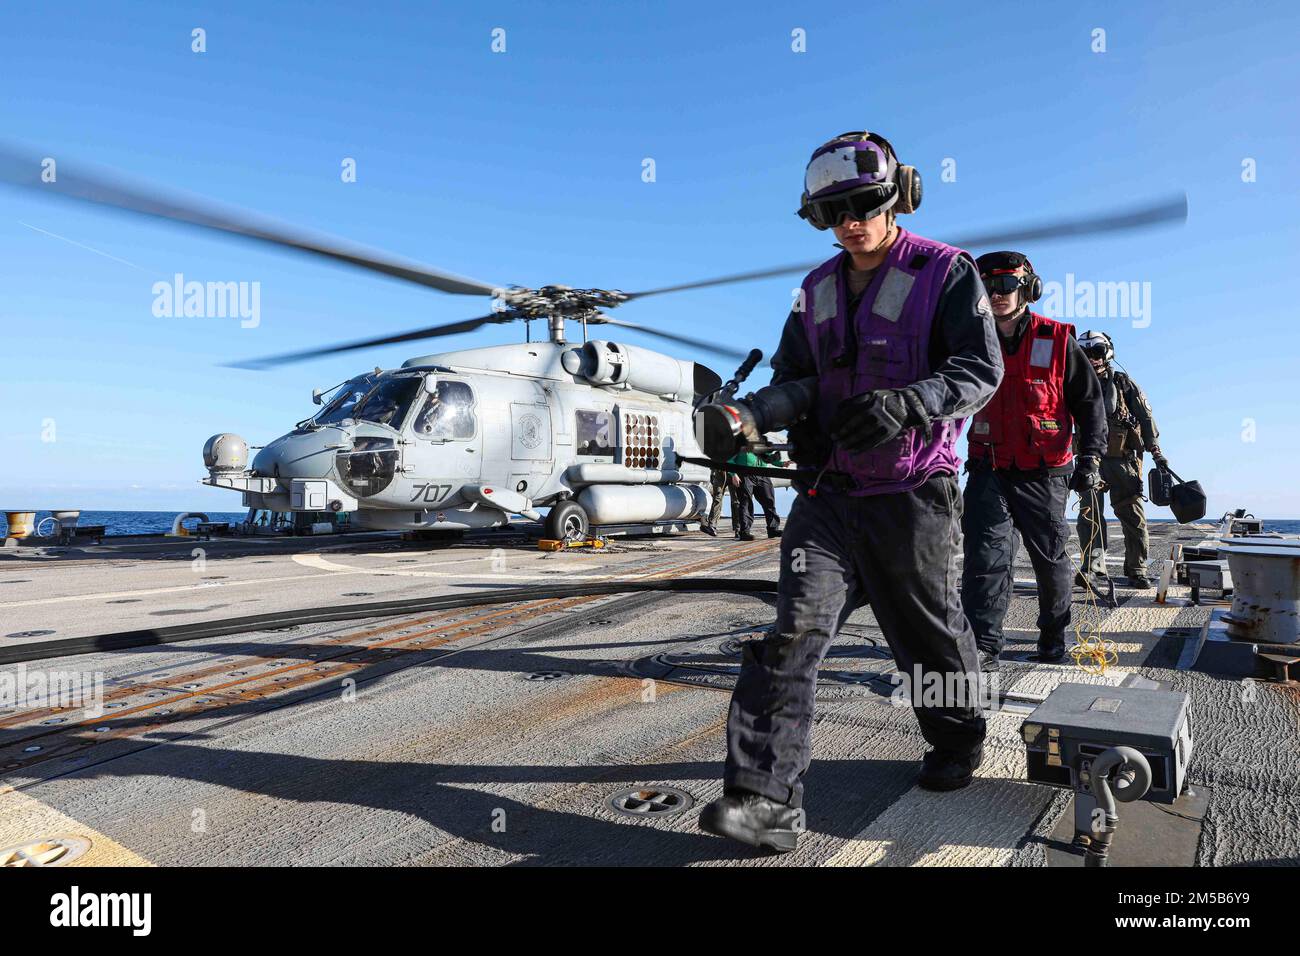 220218-N-ED646-0315- MEDITERRANEAN SEA (Feb. 18, 2022) Sailors secure from refueling an MH-60R Sea Hawk helicopter, assigned to the 'Proud Warriors' of Helicopter Maritime Strike Squadron (HSM) 72, during routine flight operations aboard Arleigh Burke-class guided-missile destroyer USS Gravely (DDG 107), Feb. 18, 2022. Gravely is deployed with the Harry S. Truman Carrier Strike Group on a scheduled deployment in the U.S. Sixth Fleet area of operations in support of naval operations to maintain maritime stability and security, and defend U.S., allied and partner interests in Europe and Africa. Stock Photo